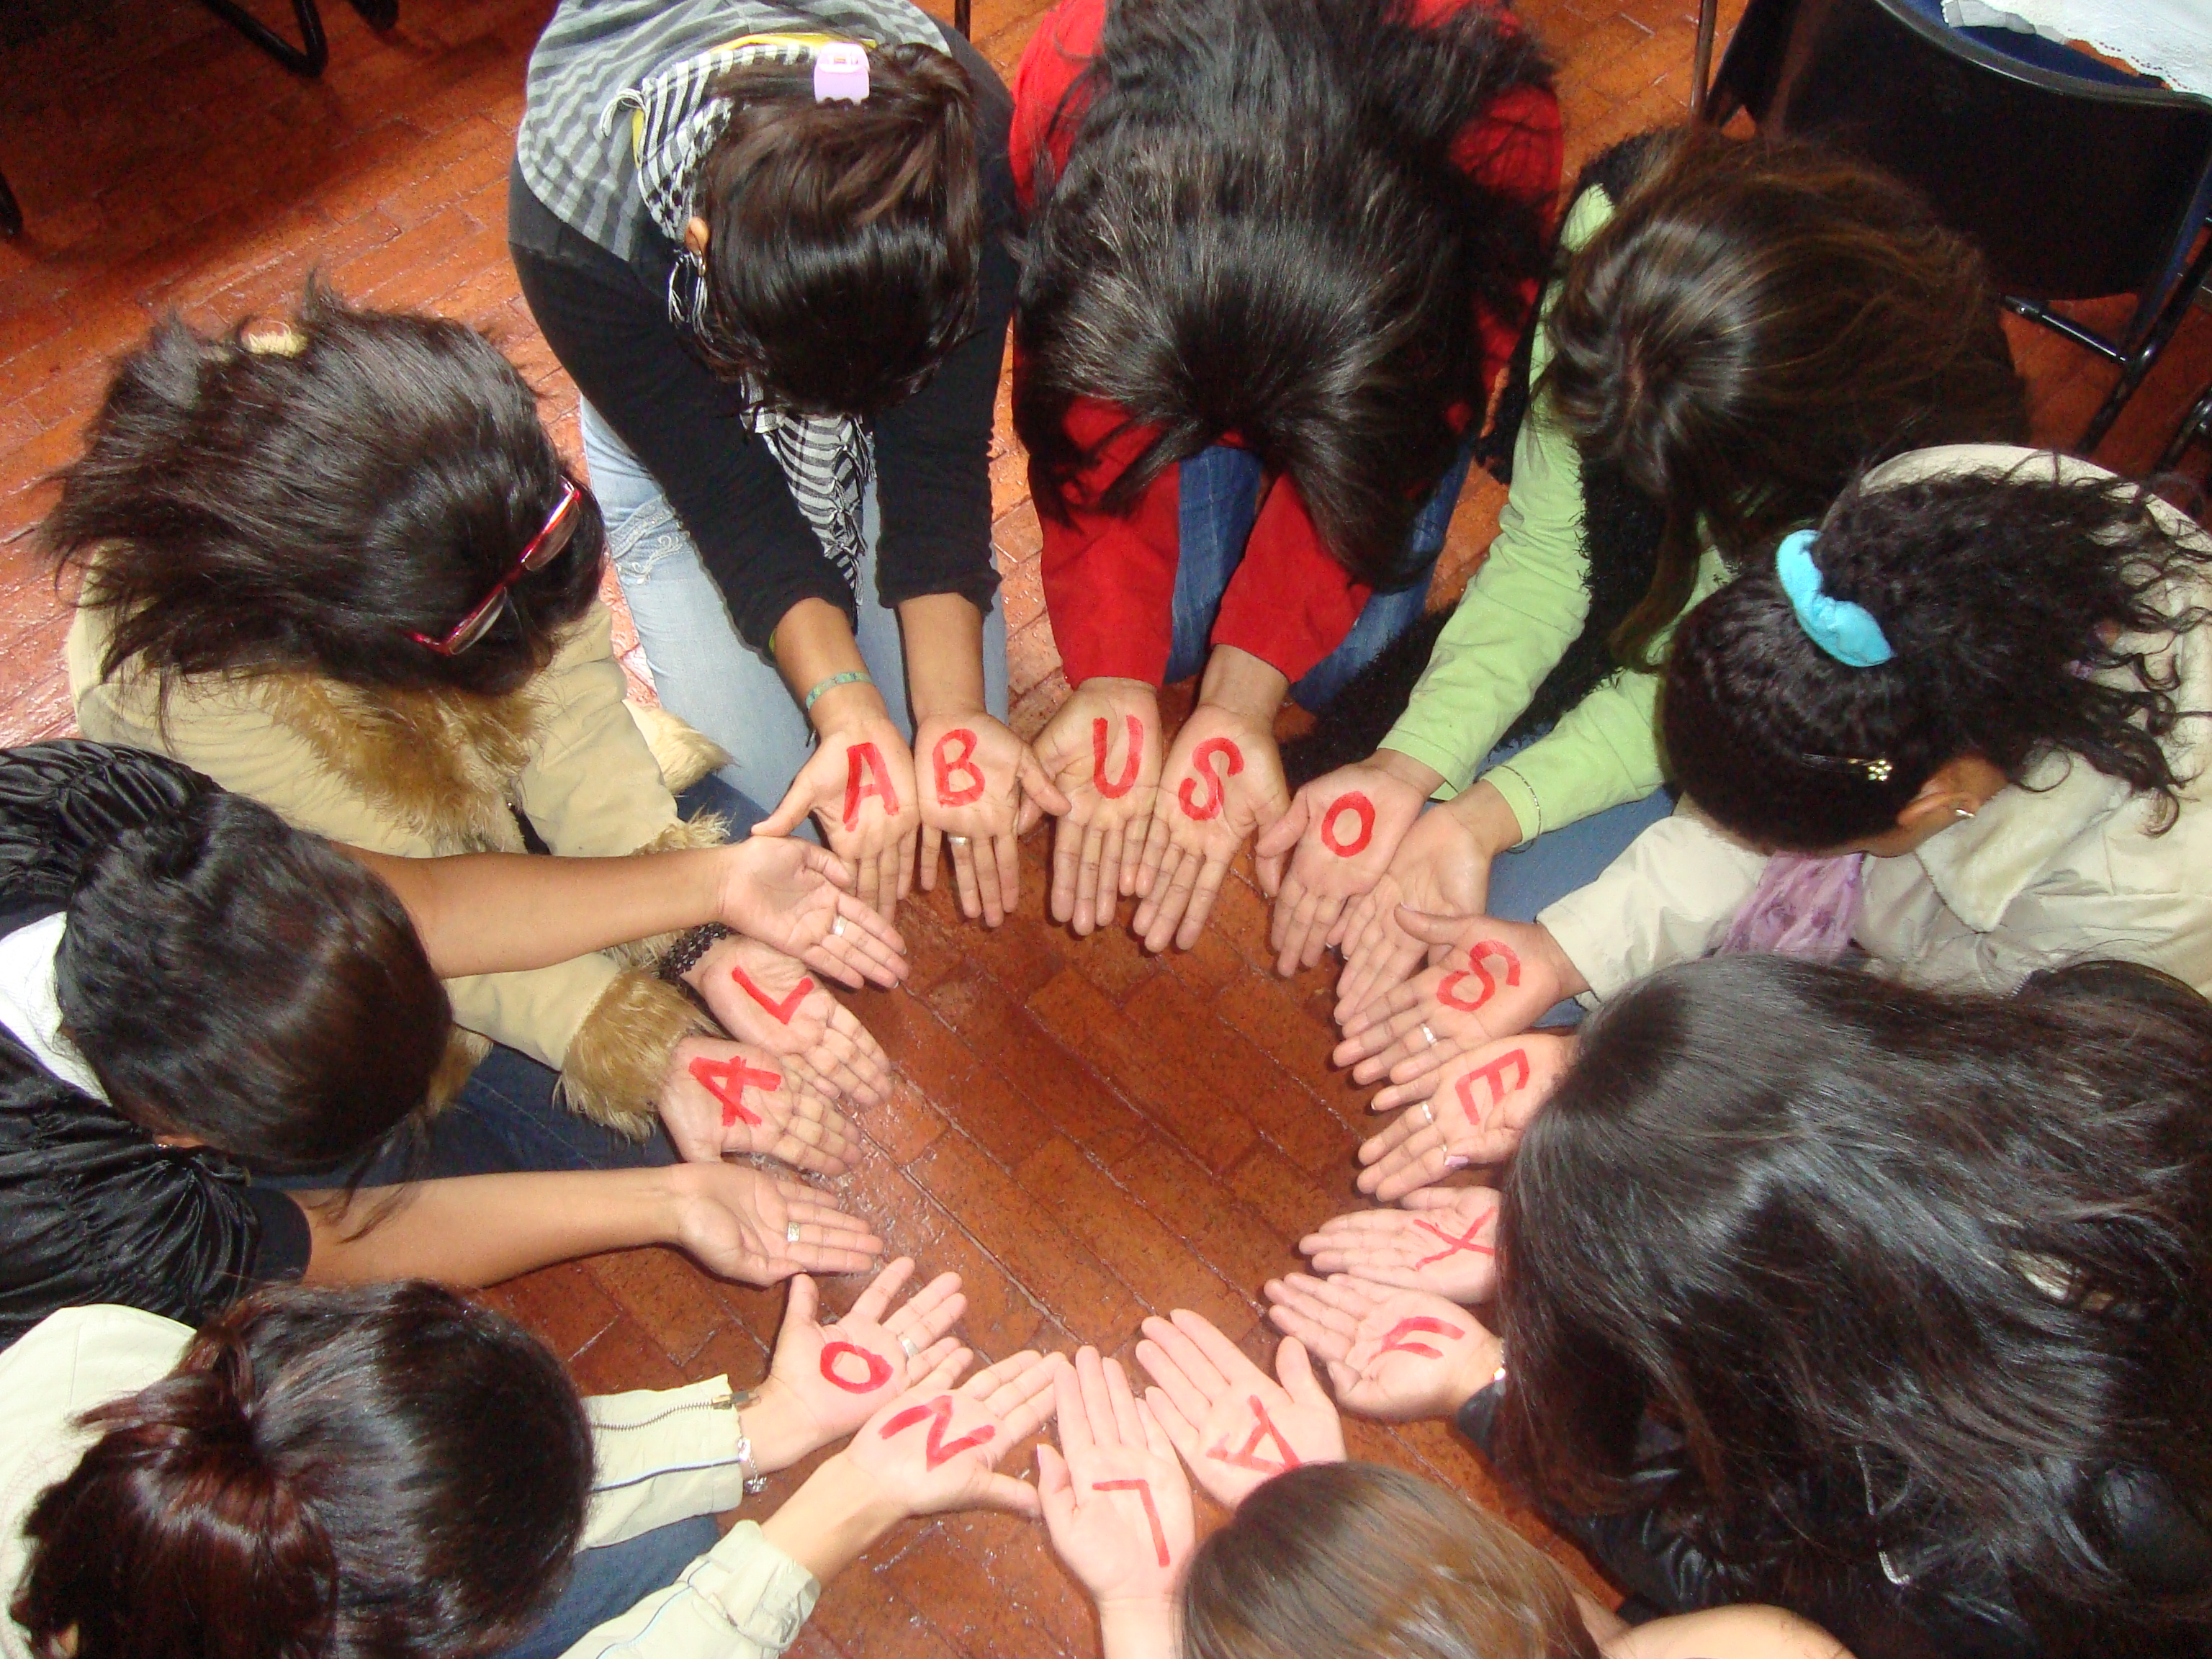 Members of a support group for survivors of sexual violence create a circle with their hands, Bogotá, Colombia, March 2011. The letters on the hands of the women in a circle form the words &quot;No al abuso sexual&quot; (No to sexual abuse). They are a group of women who have been victims of sexual violence in the armed conflict in Colombia who meet regularly.